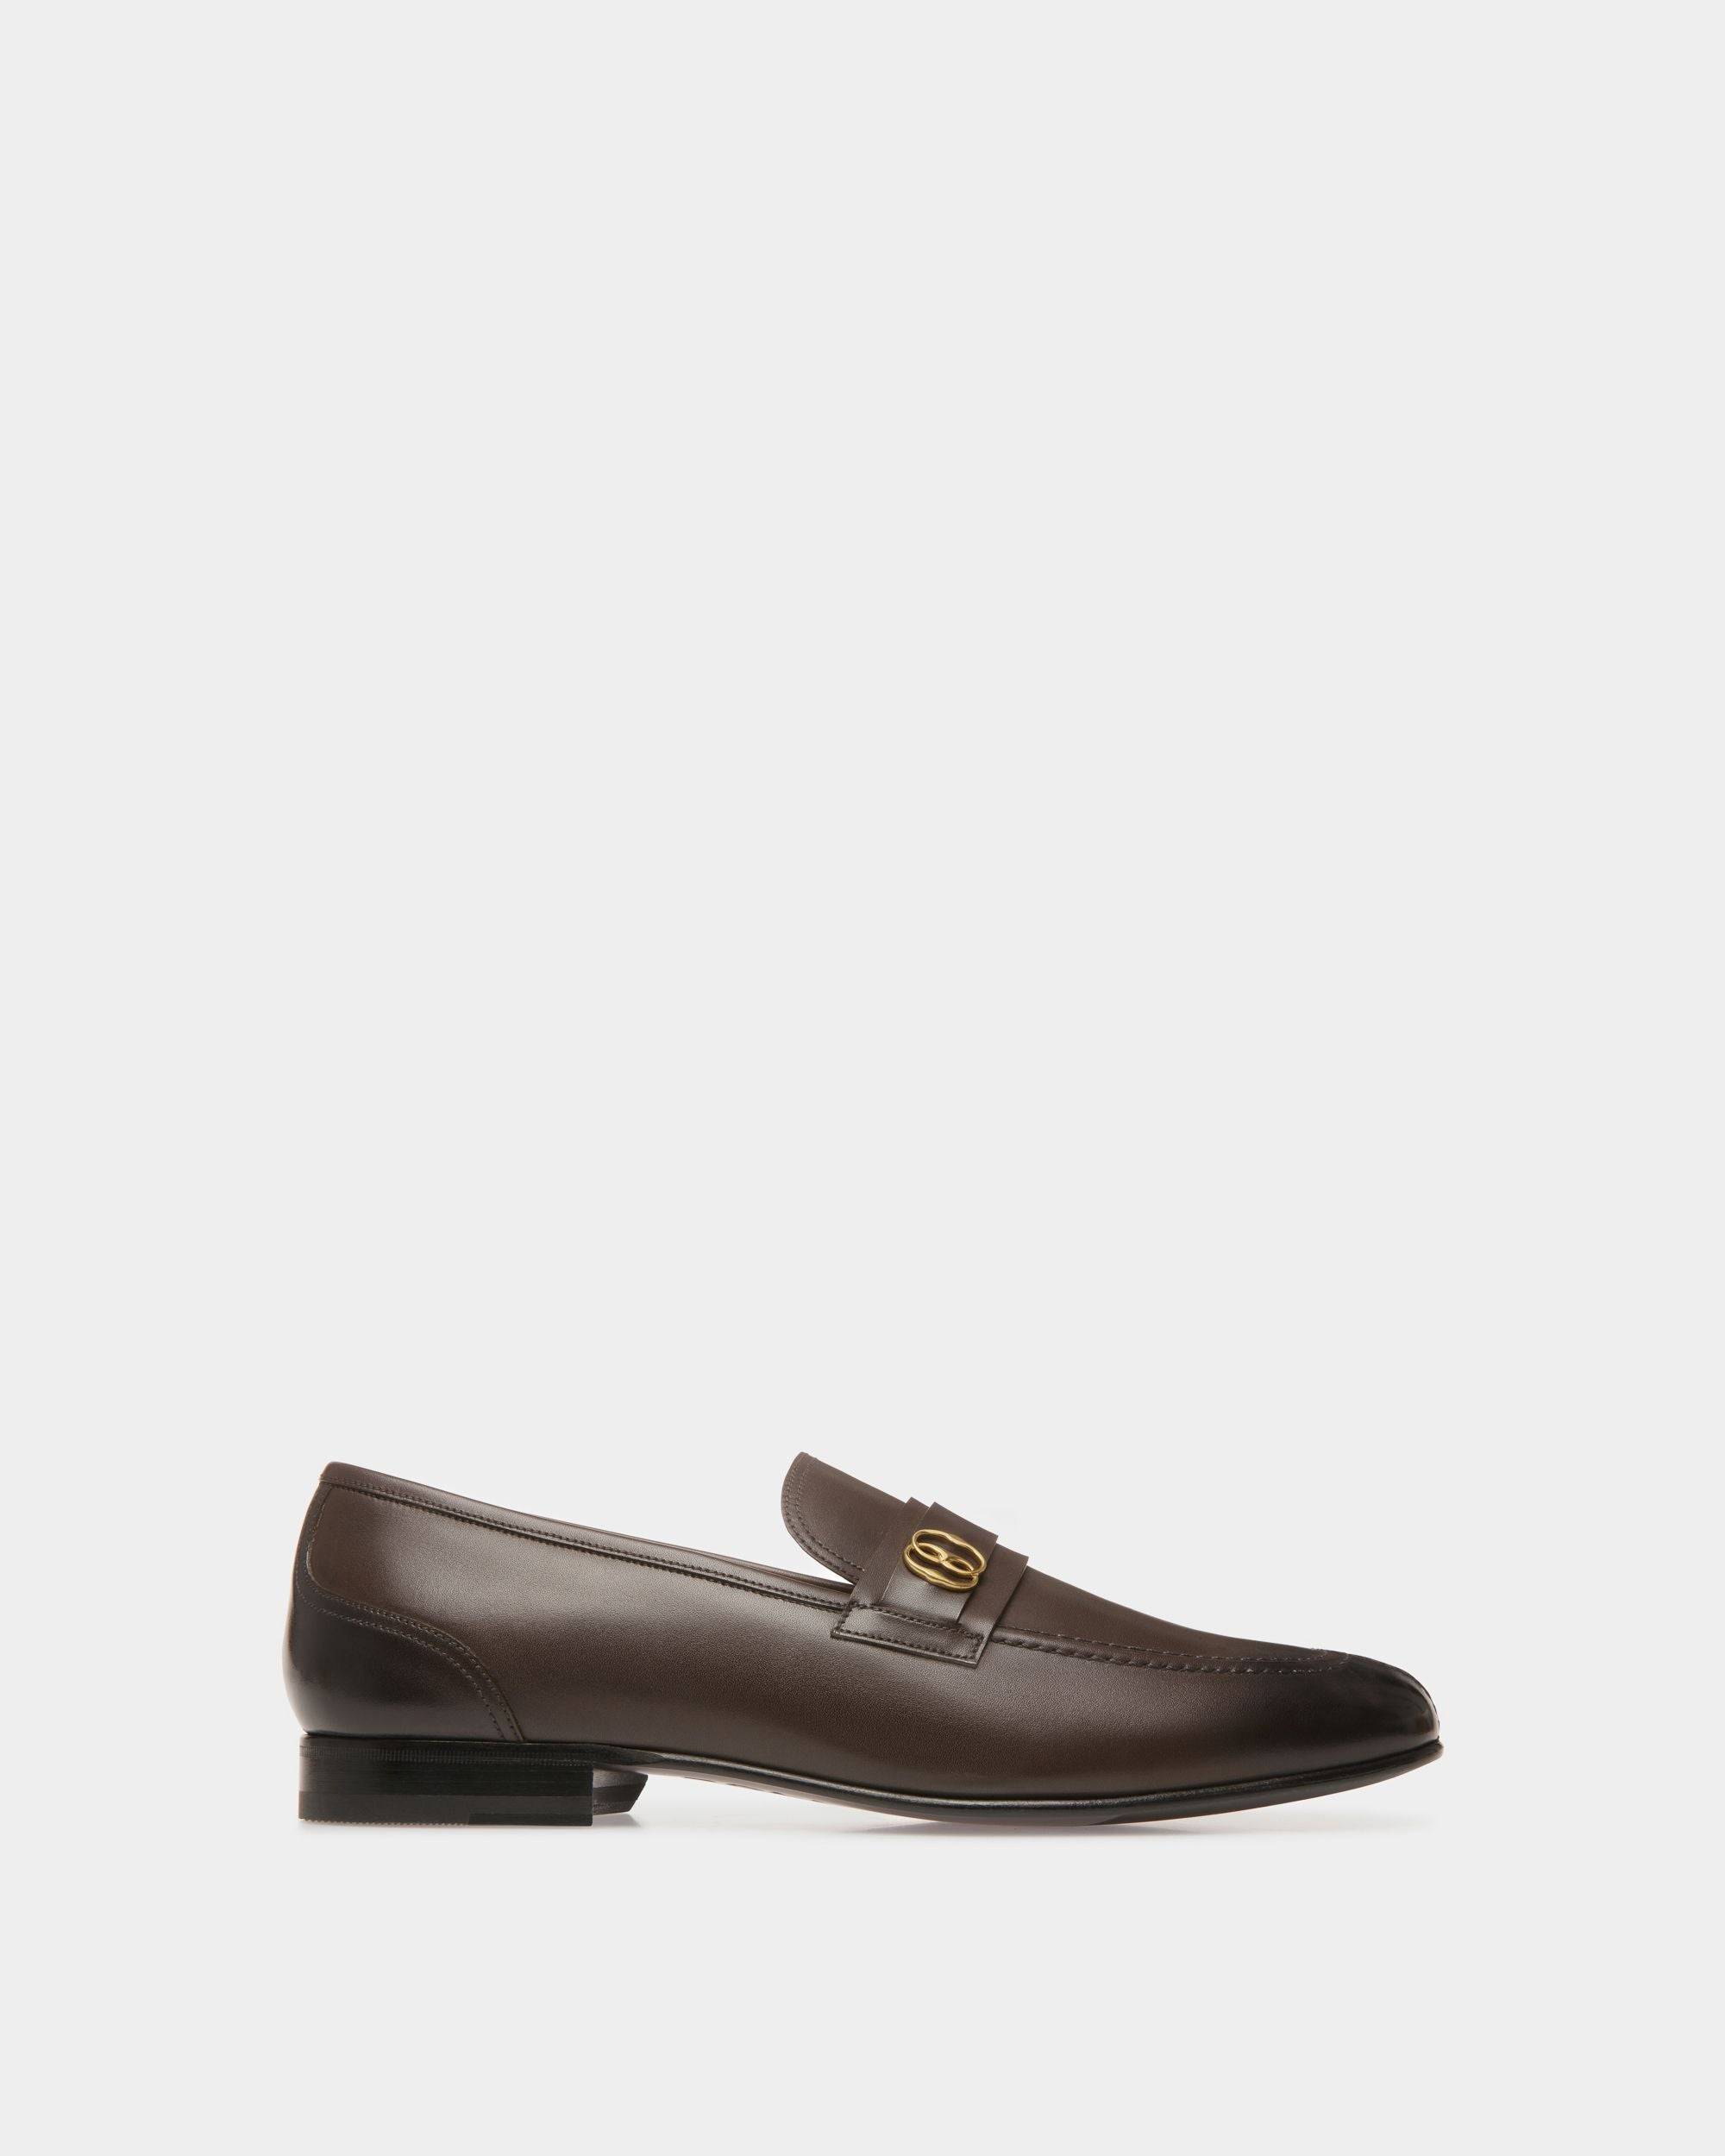 Men's Suisse Loafers In Brown Leather | Bally | Still Life Side